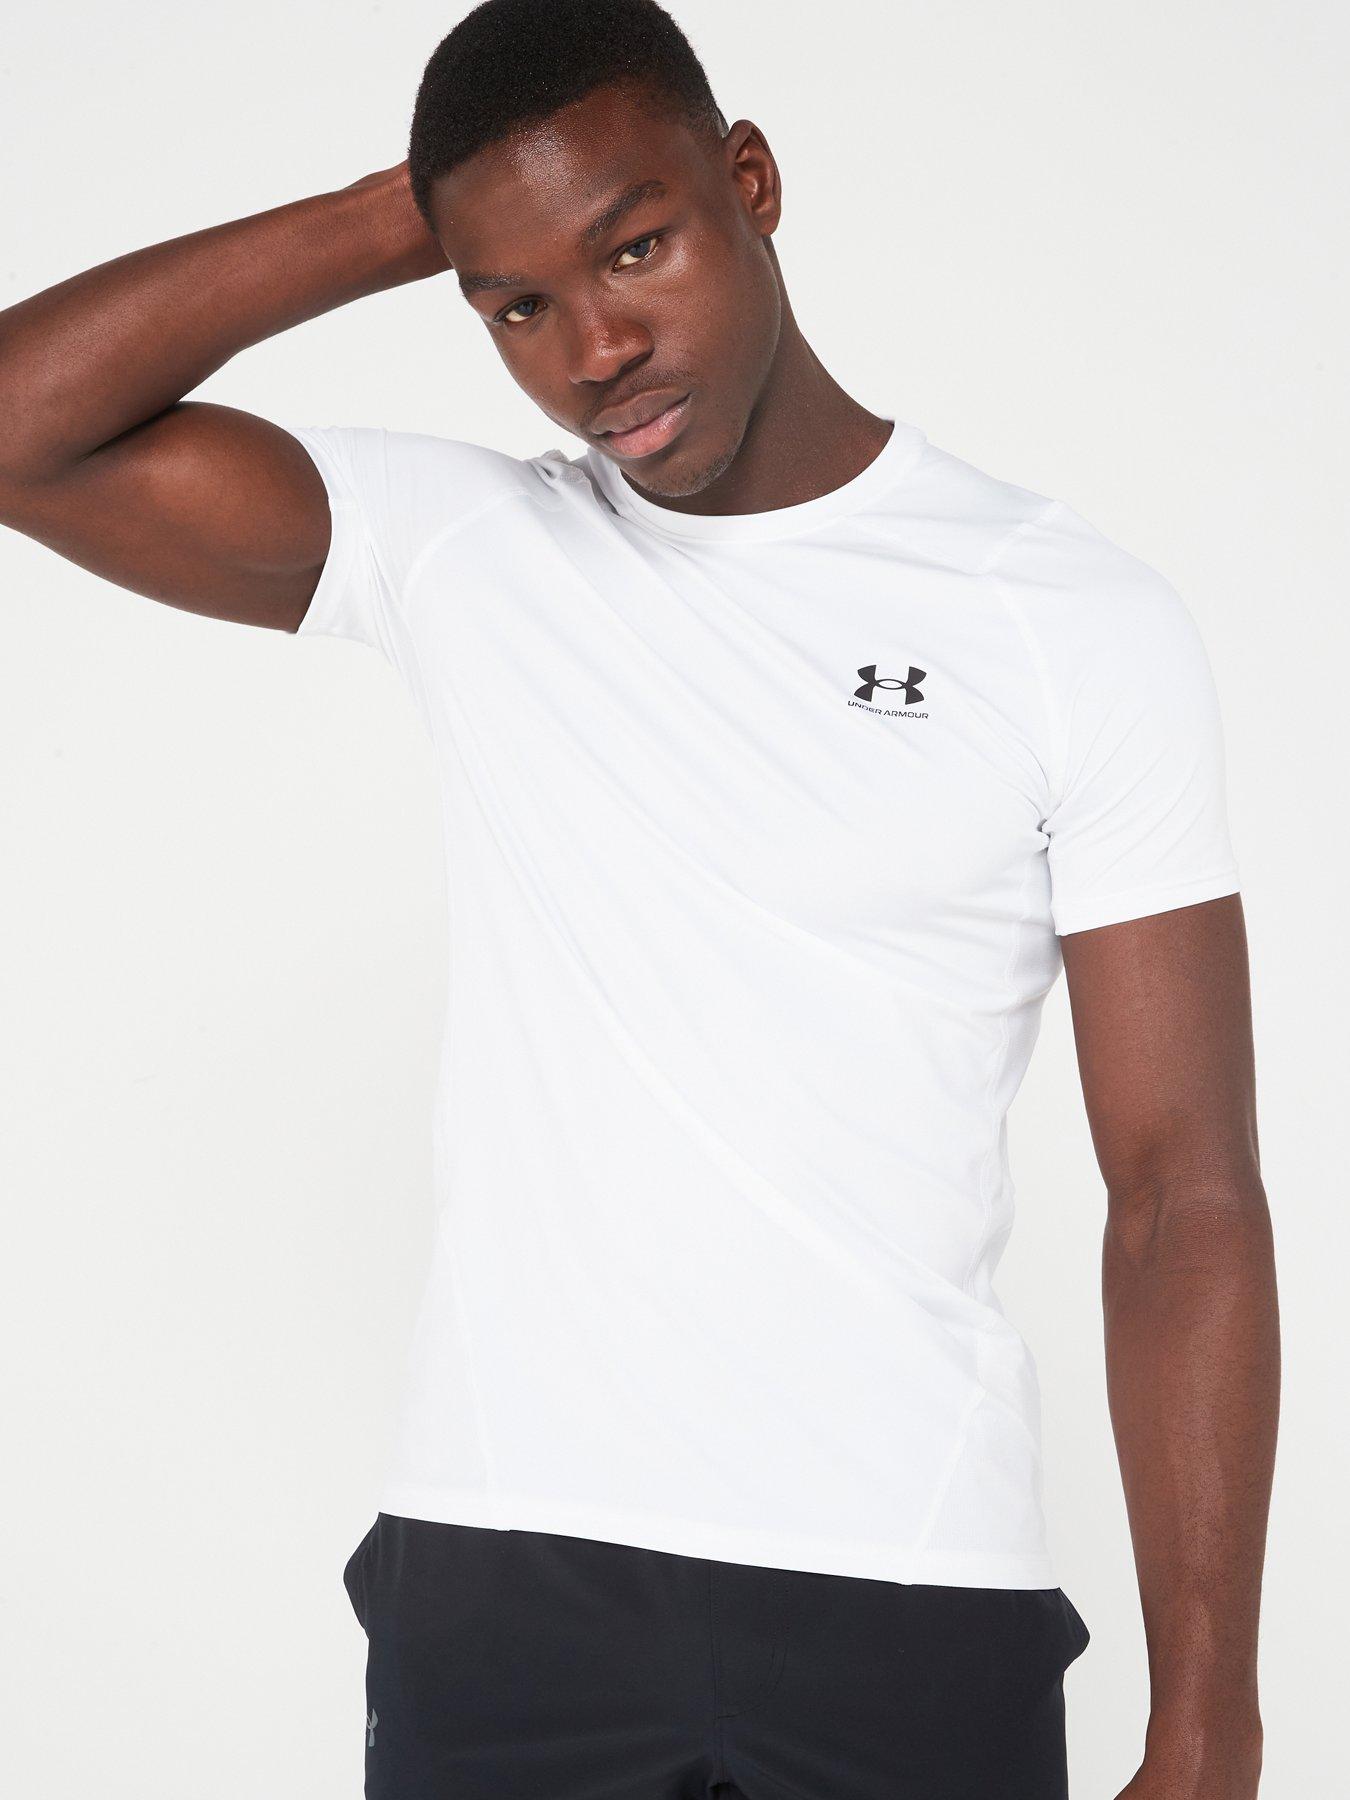 UNDER ARMOUR Mens Training Heat Gear Armour Fitted T-shirt - White/black